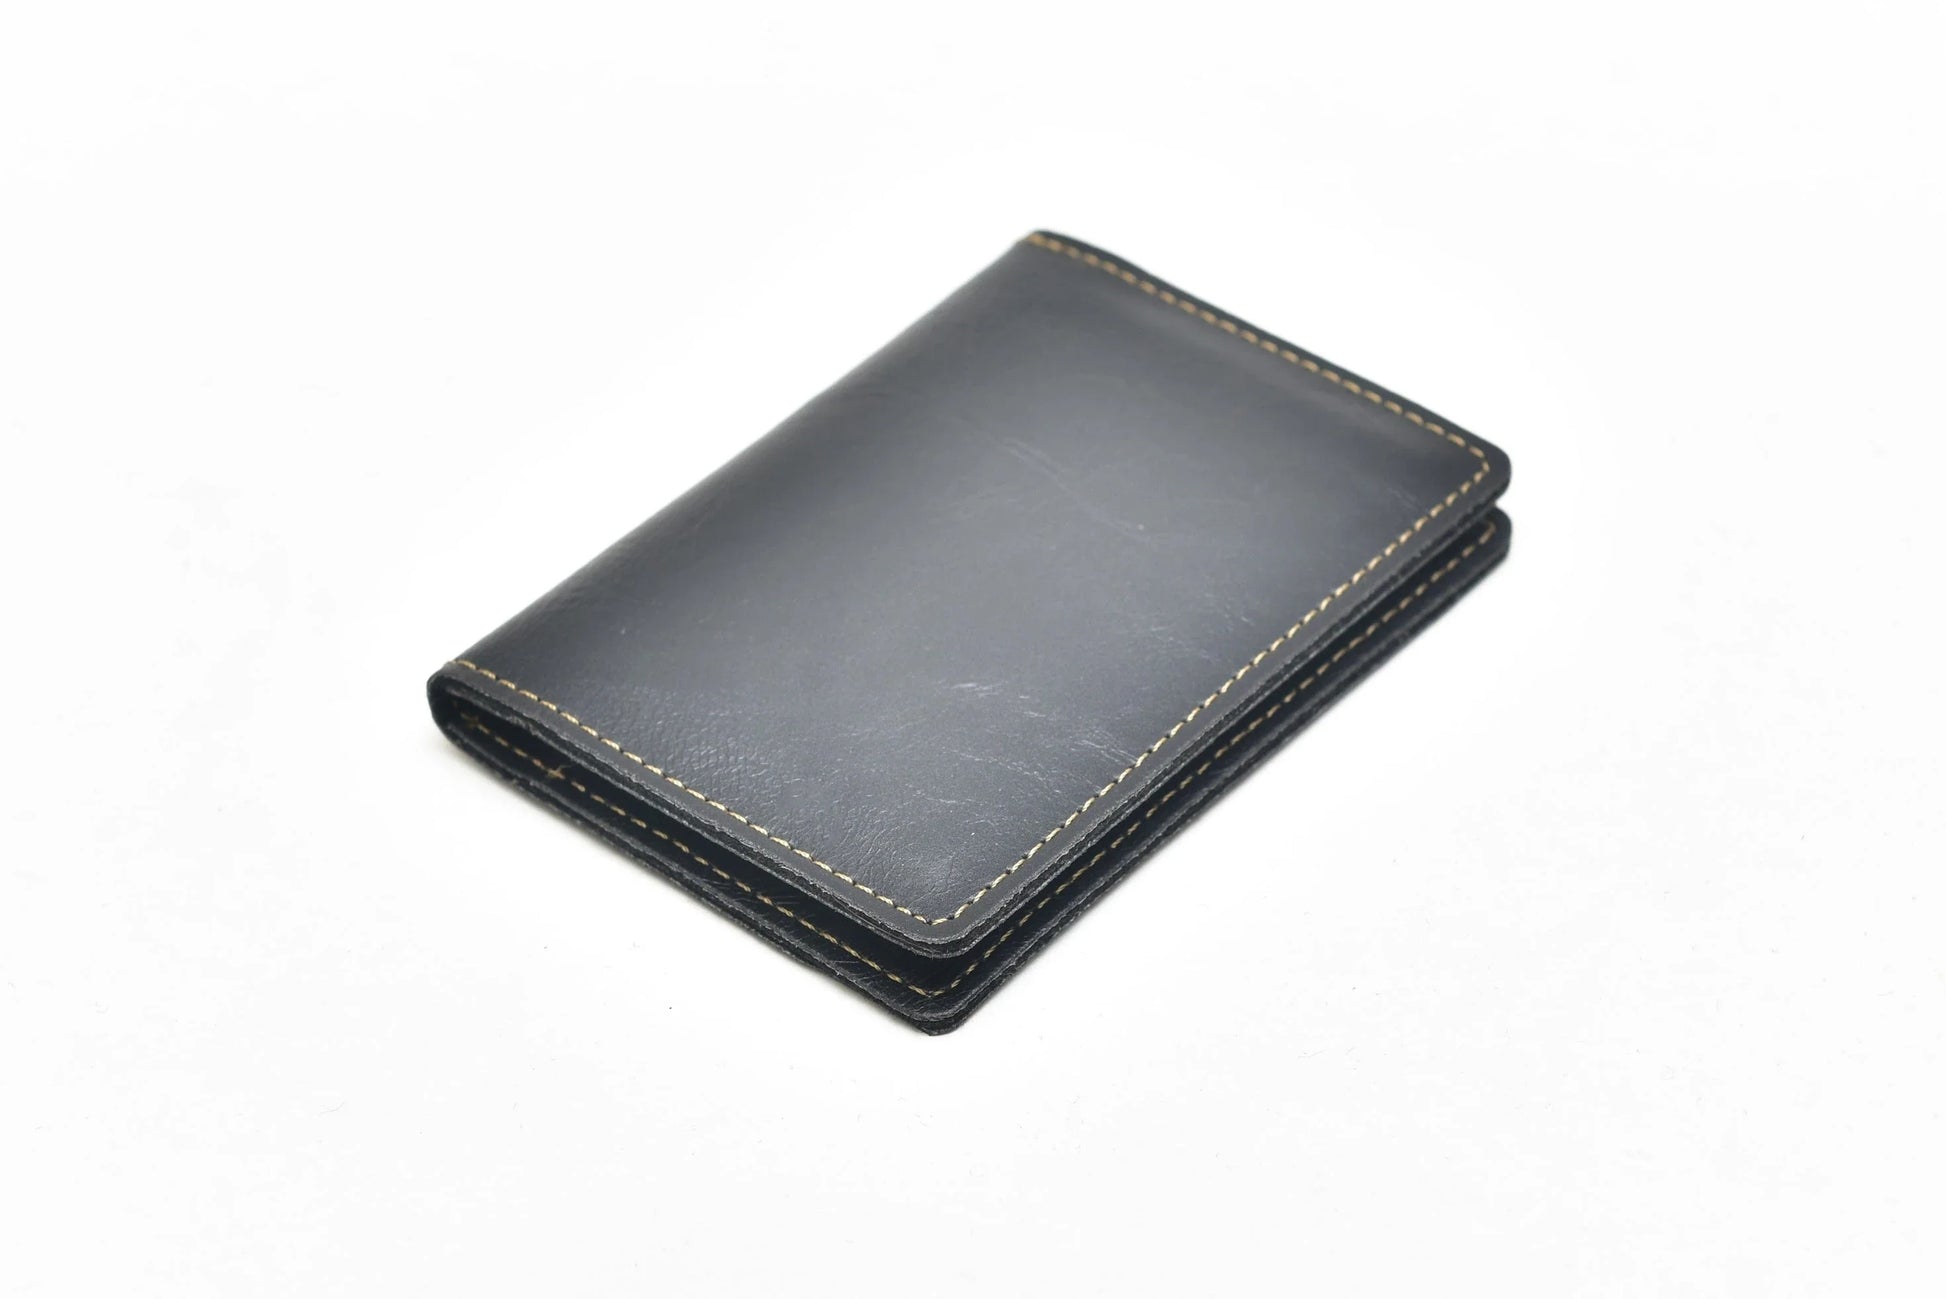 Stand out from the crowd with a personalized leather passport case that combines functionality and timeless style.